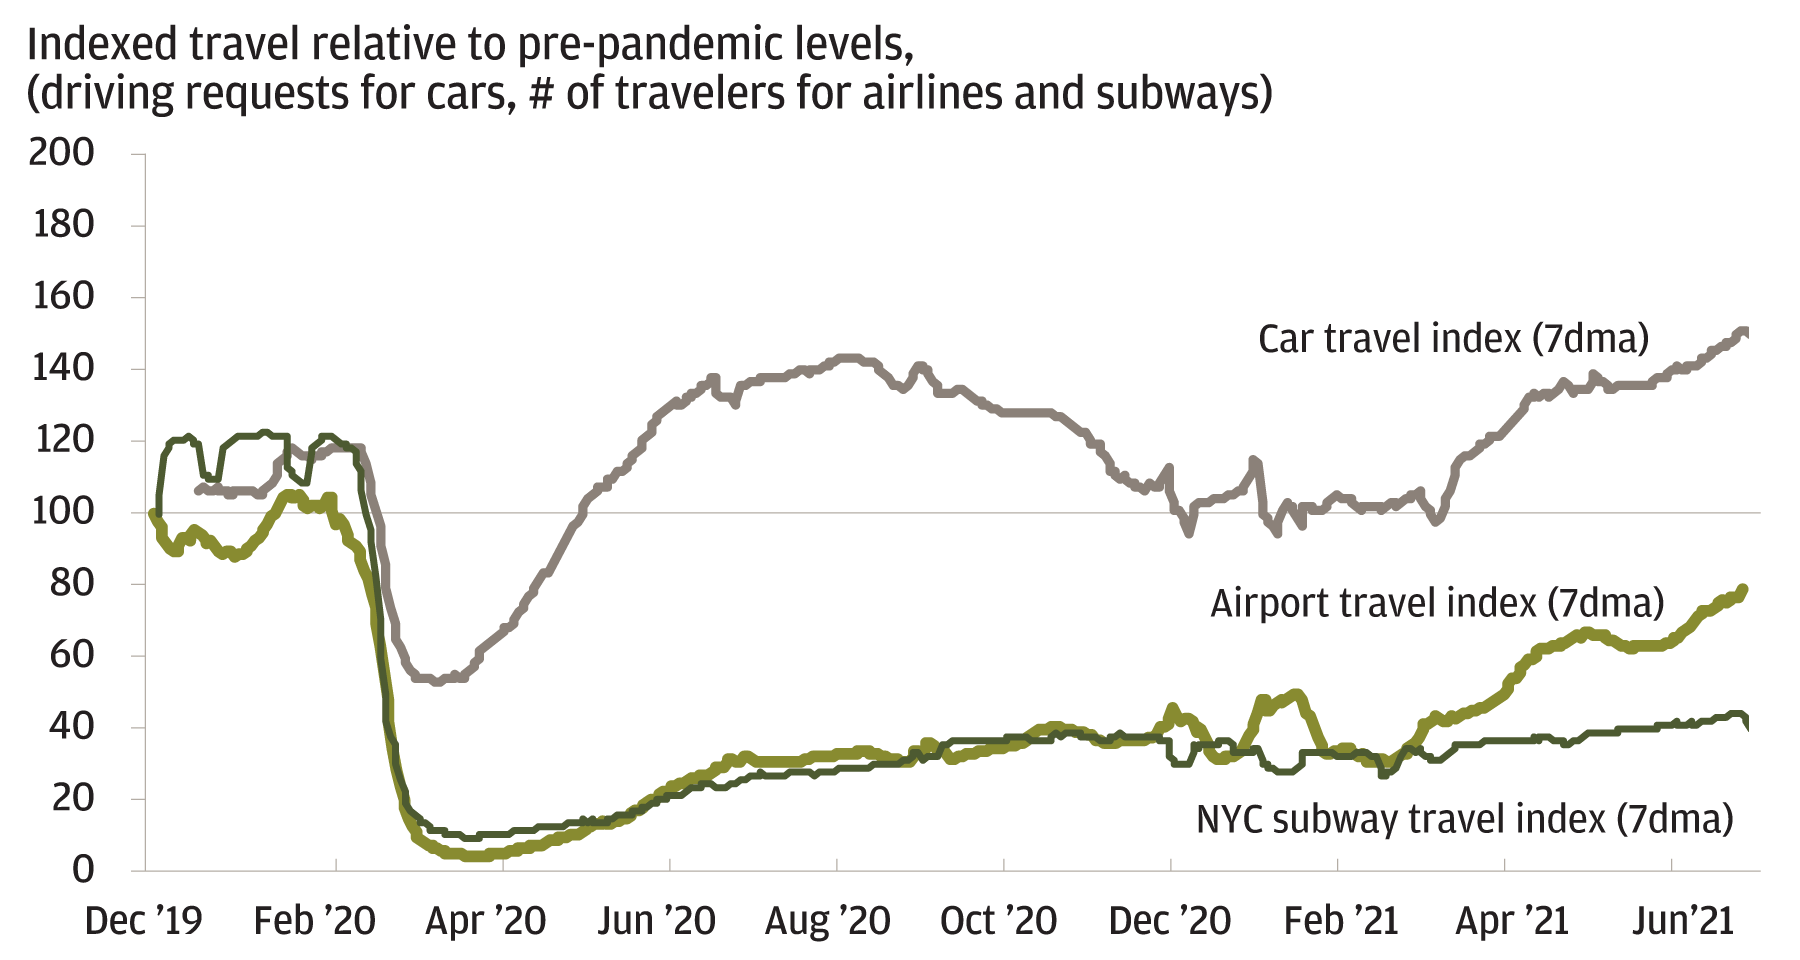 Chart 2: Indexed travel relative to pre-pandemic levels